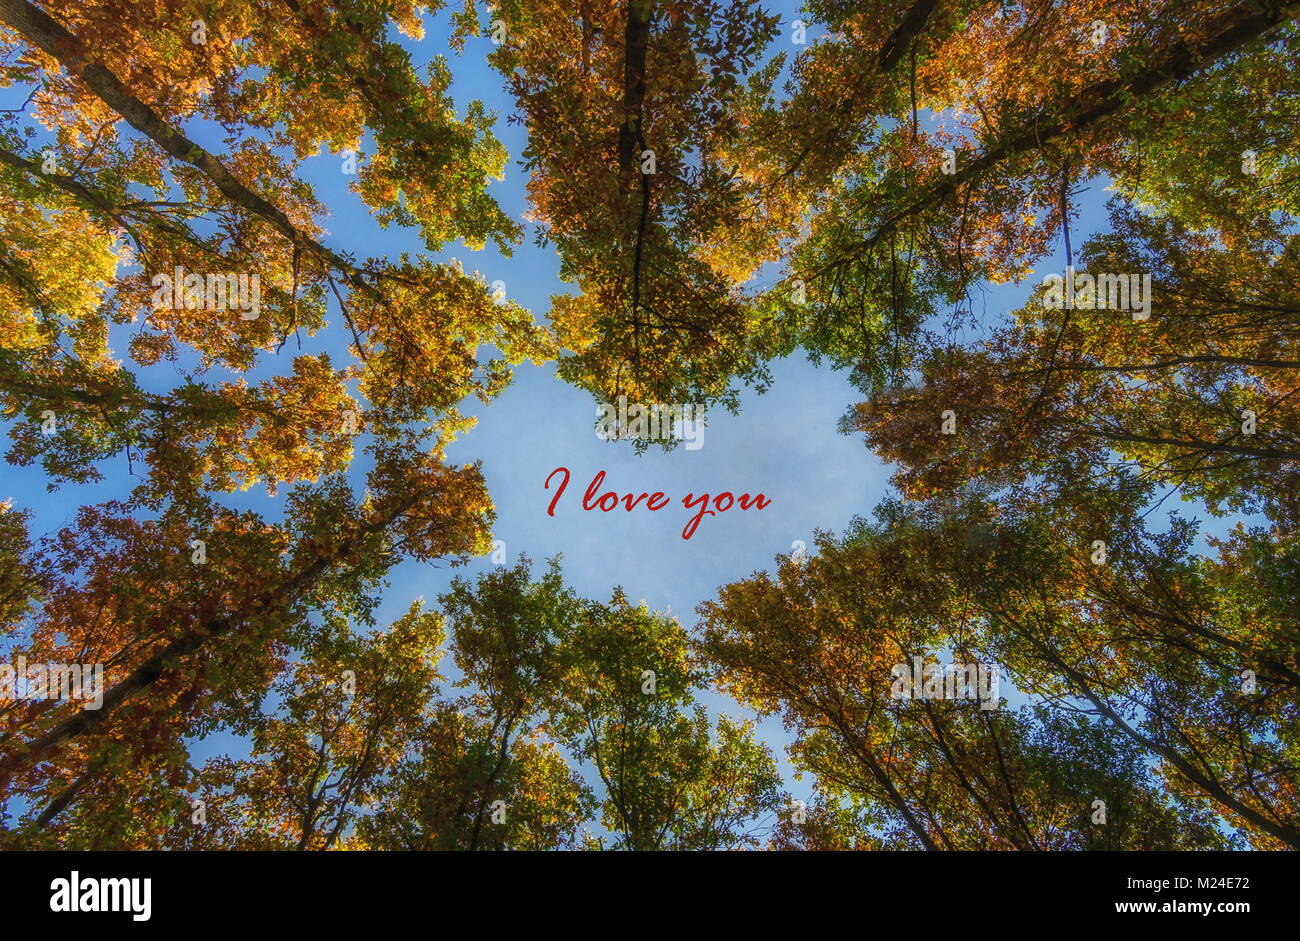 Heart shape crown trees for valentine's day, with text: I love you Stock Photo